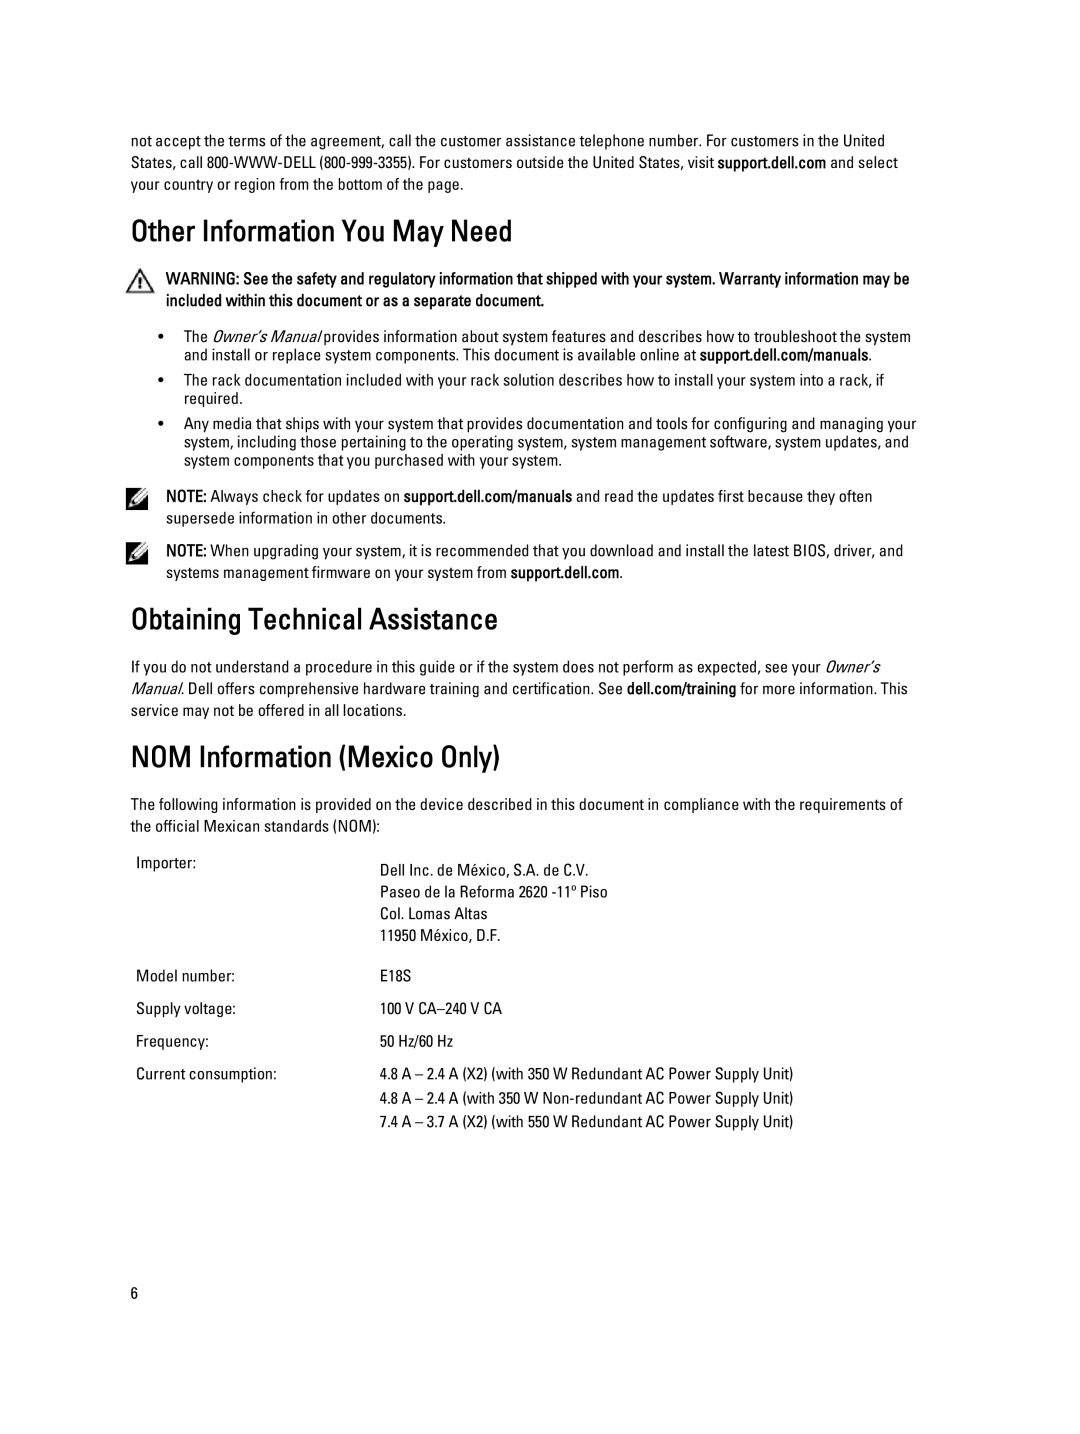 Dell R320 manual Other Information You May Need, Obtaining Technical Assistance NOM Information Mexico Only 